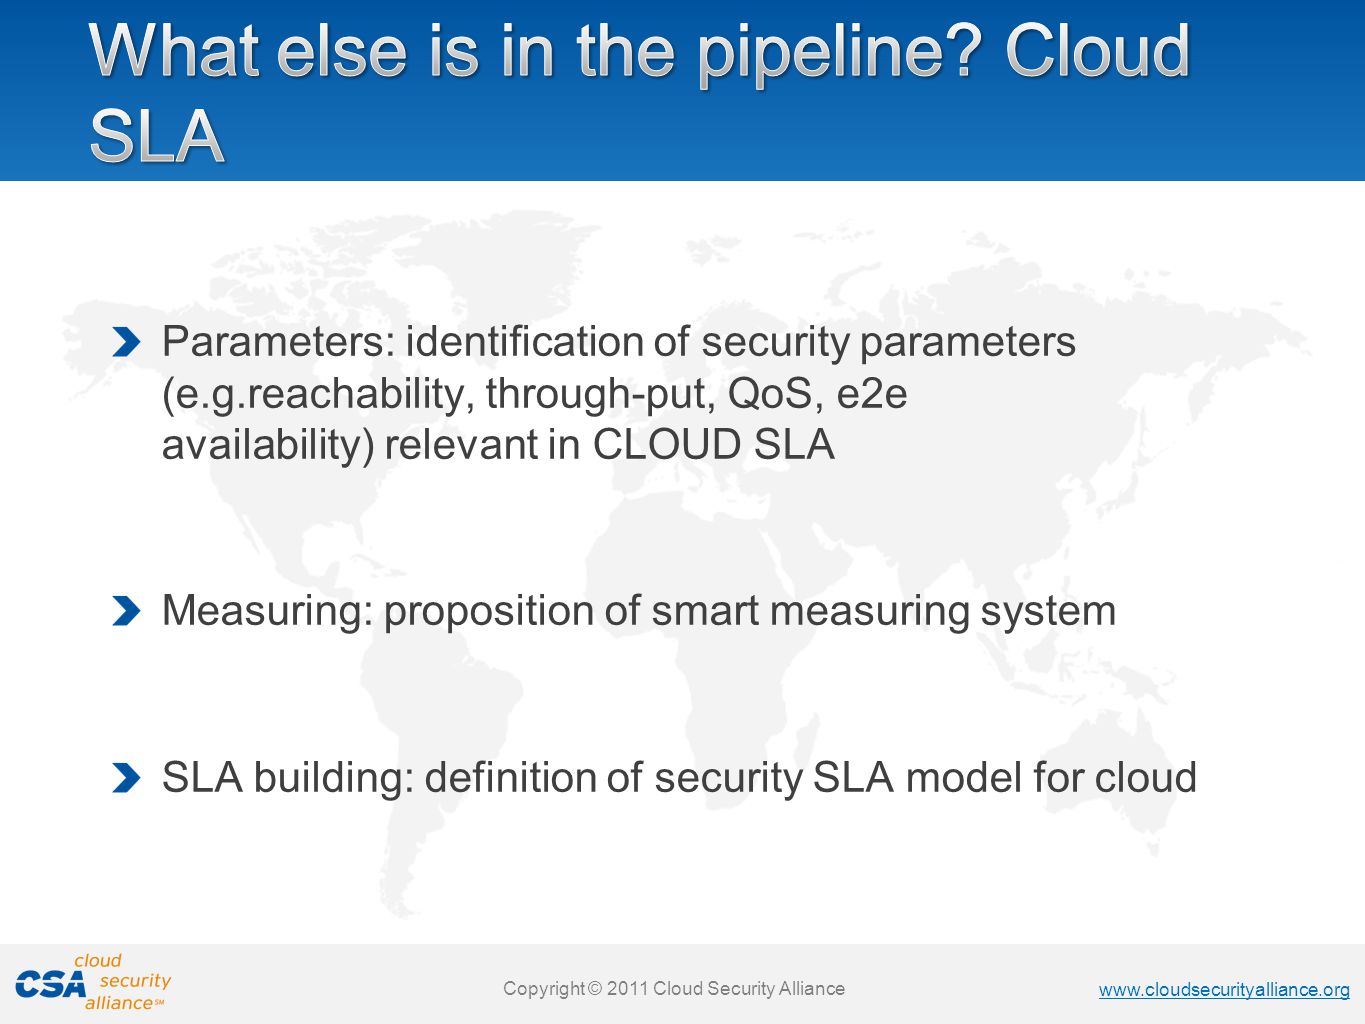 Copyright © 2011 Cloud Security Alliance   Copyright © 2011 Cloud Security Alliance   Copyright © 2011 Cloud Security Alliance   Copyright © 2011 Cloud Security Alliance Parameters: identification of security parameters (e.g.reachability, through-put, QoS, e2e availability) relevant in CLOUD SLA Measuring: proposition of smart measuring system SLA building: definition of security SLA model for cloud